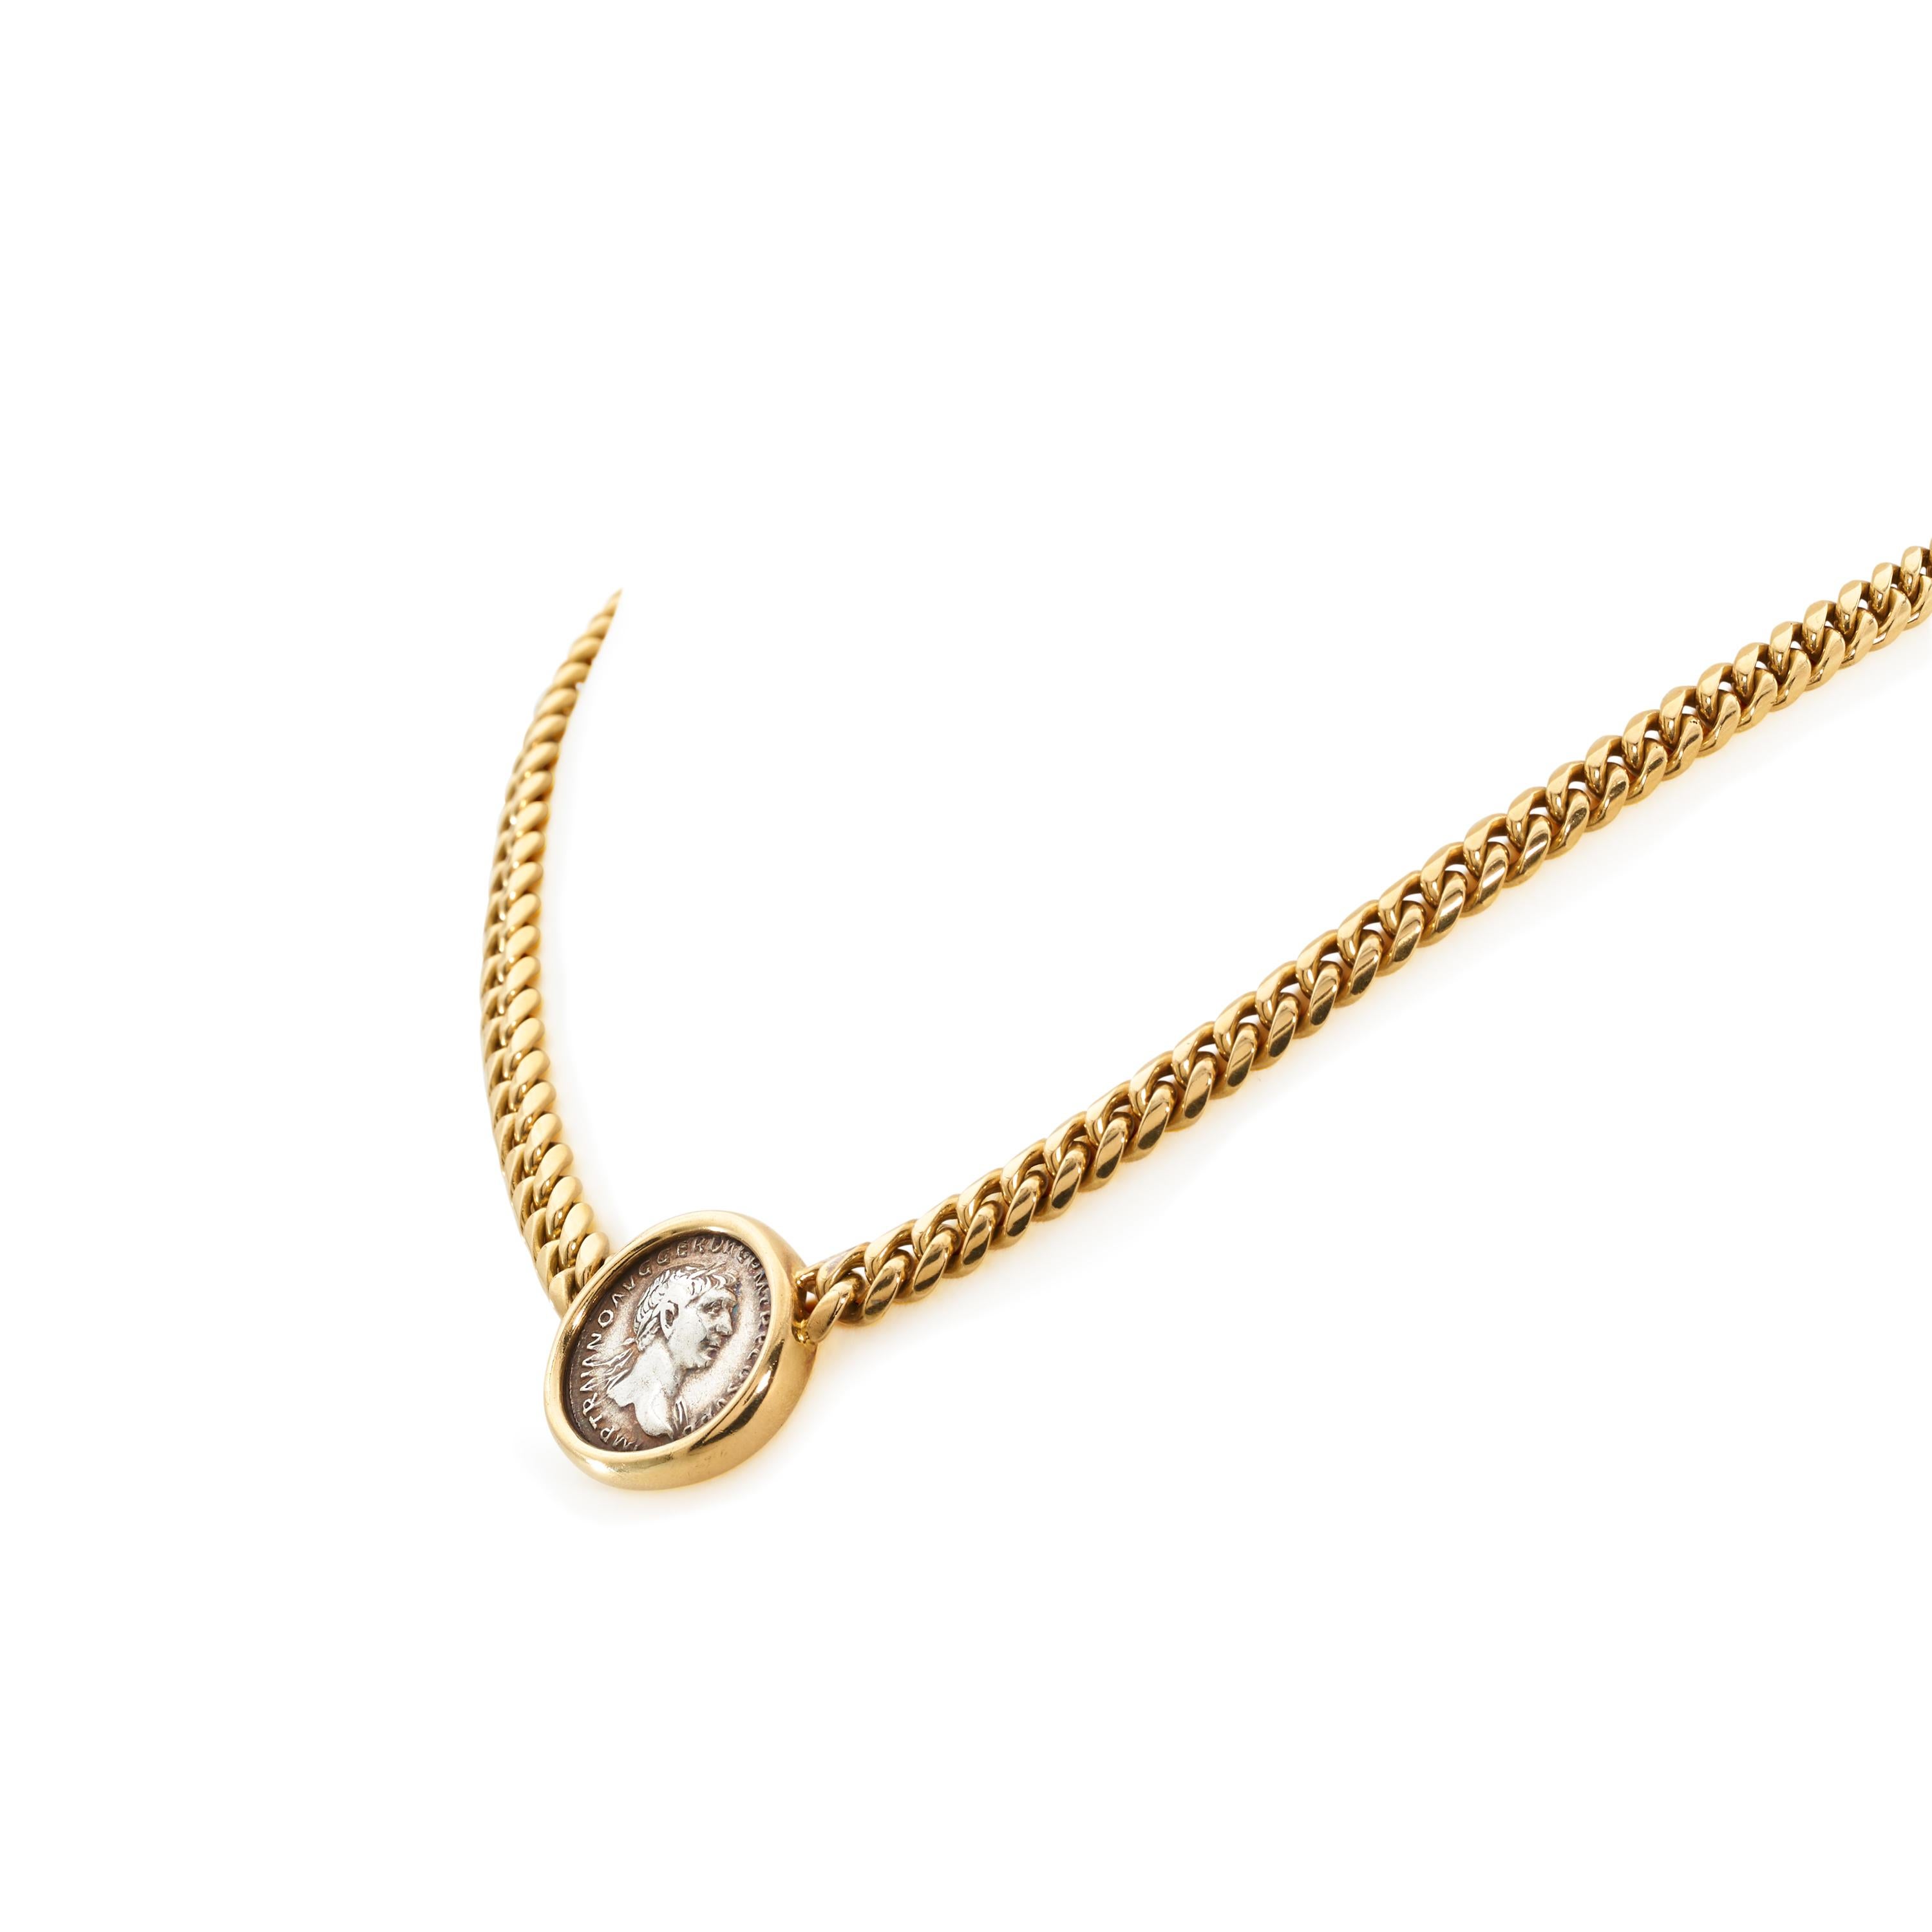 Authentic Bvlgari 'Monete' coin necklace crafted in 18 karat yellow gold. The curb link necklace features an ancient Roman coin depicting Caesar Nerva Traianus that is set in yellow gold. The bezel setting is stamped on the back with 'Roma- Traianvs